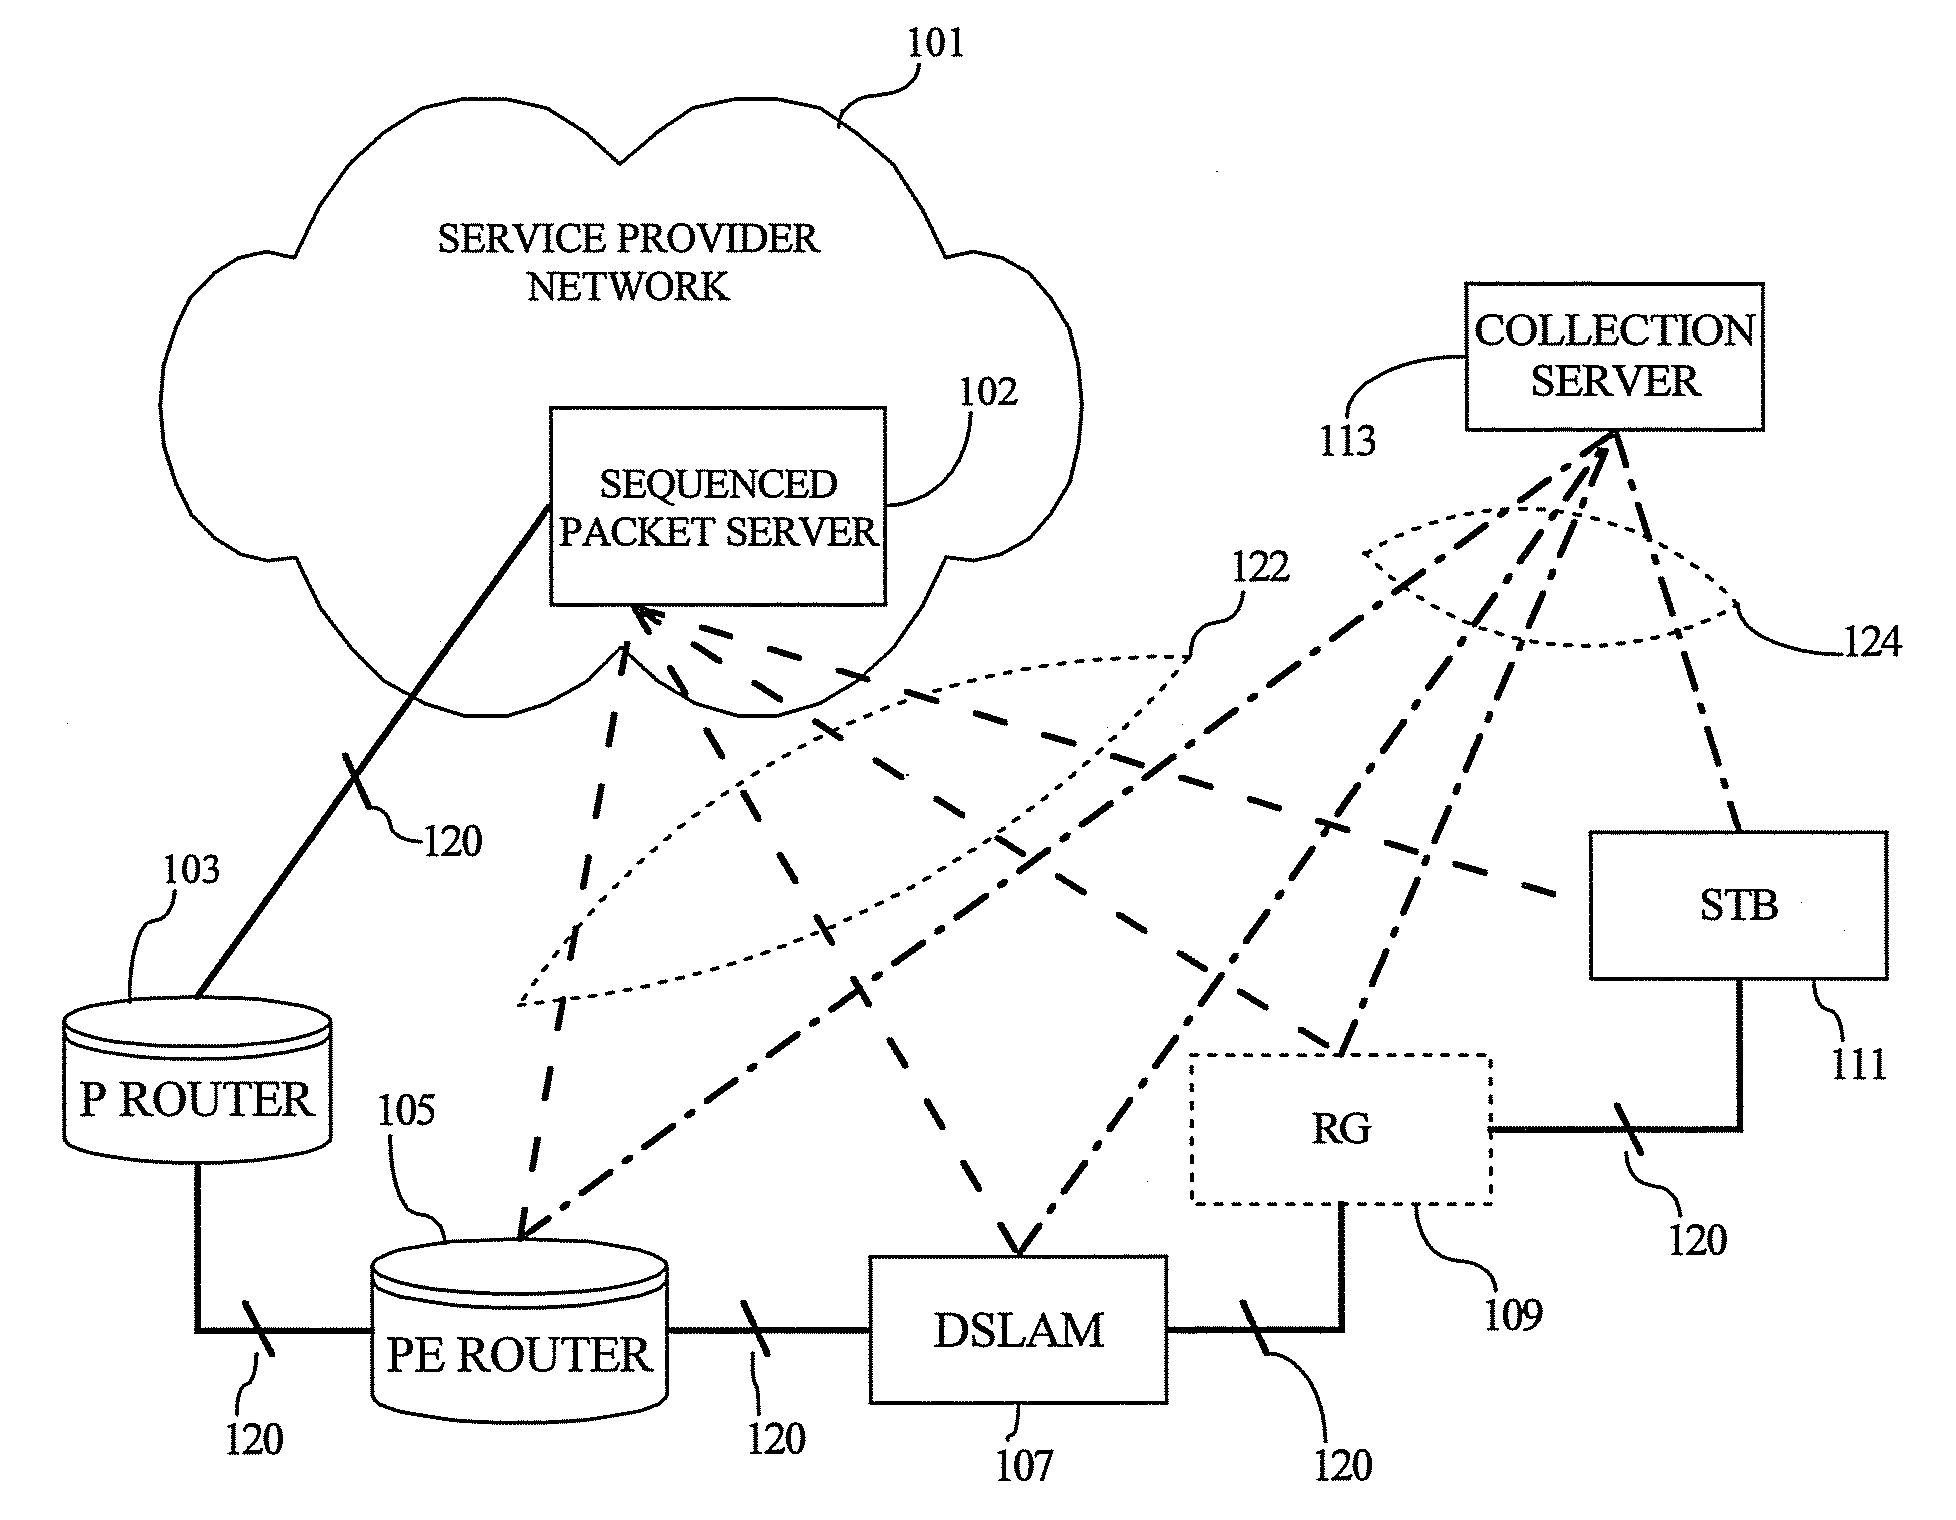 Gathering traffic profiles for endpoint devices that are operably coupled to a network